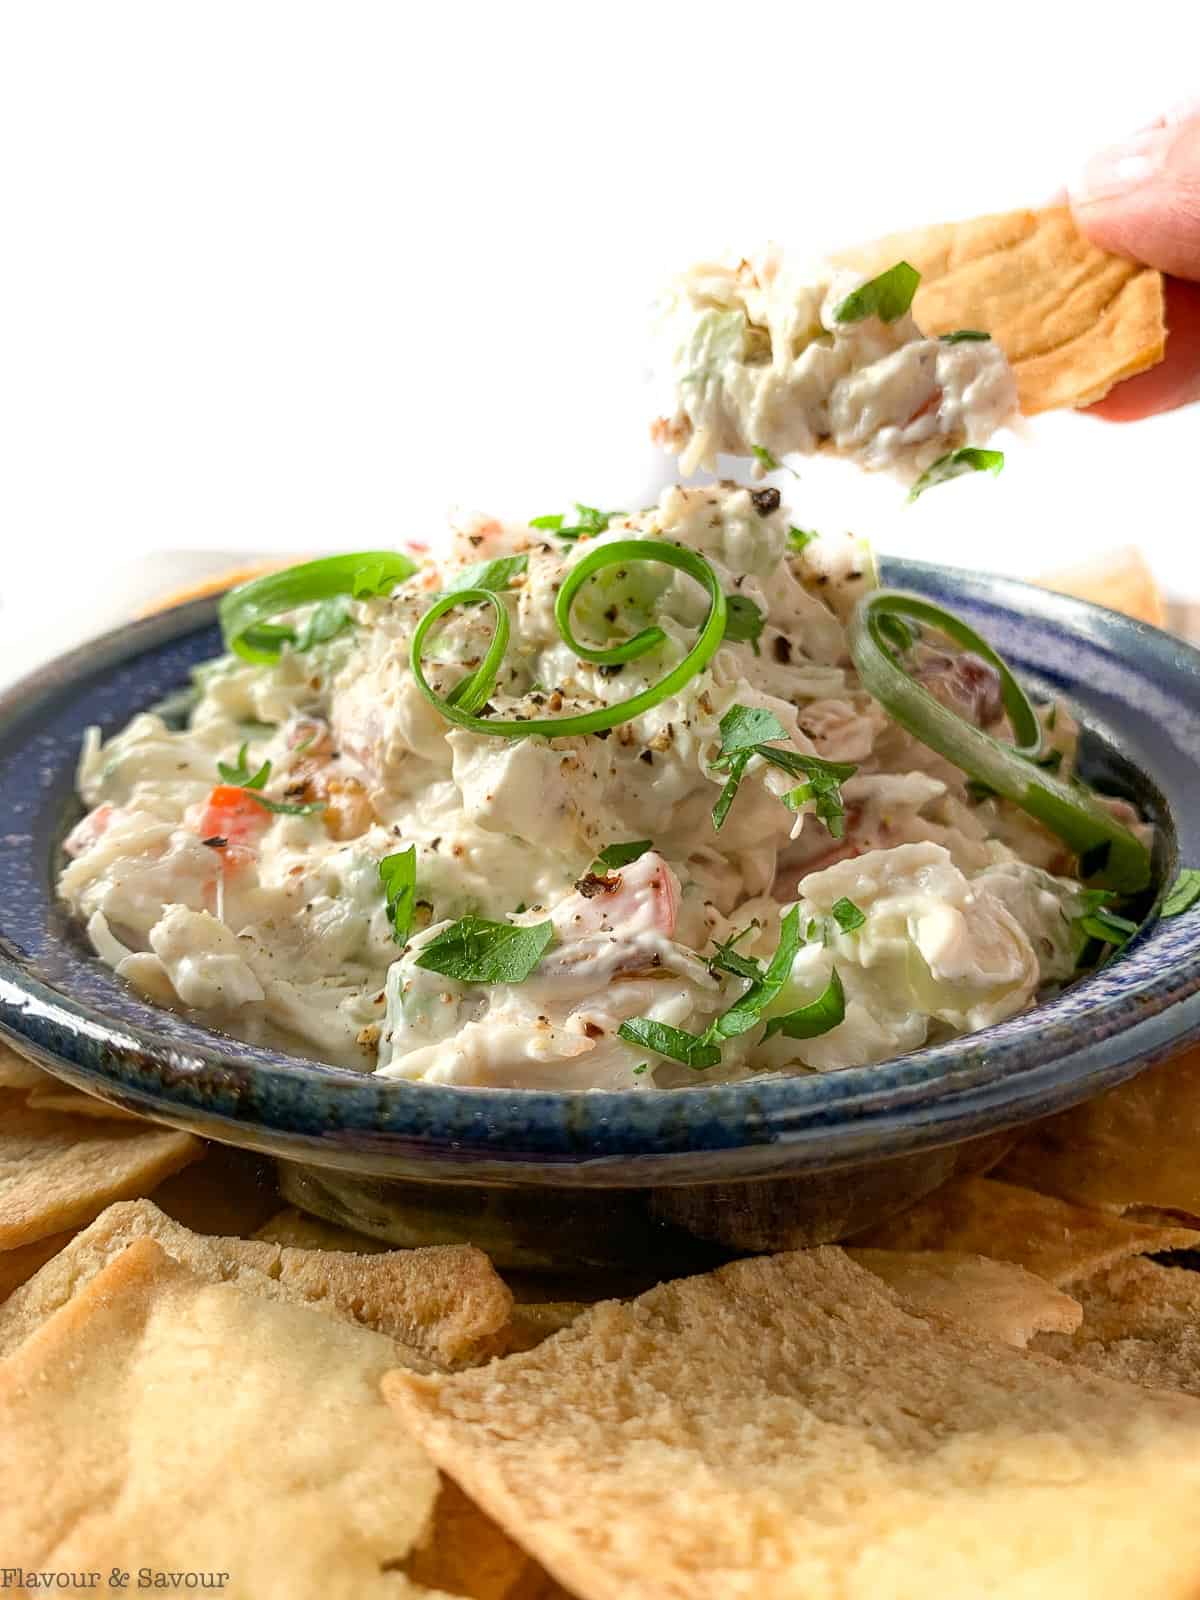 A scoop of cold crab dip on a cracker.